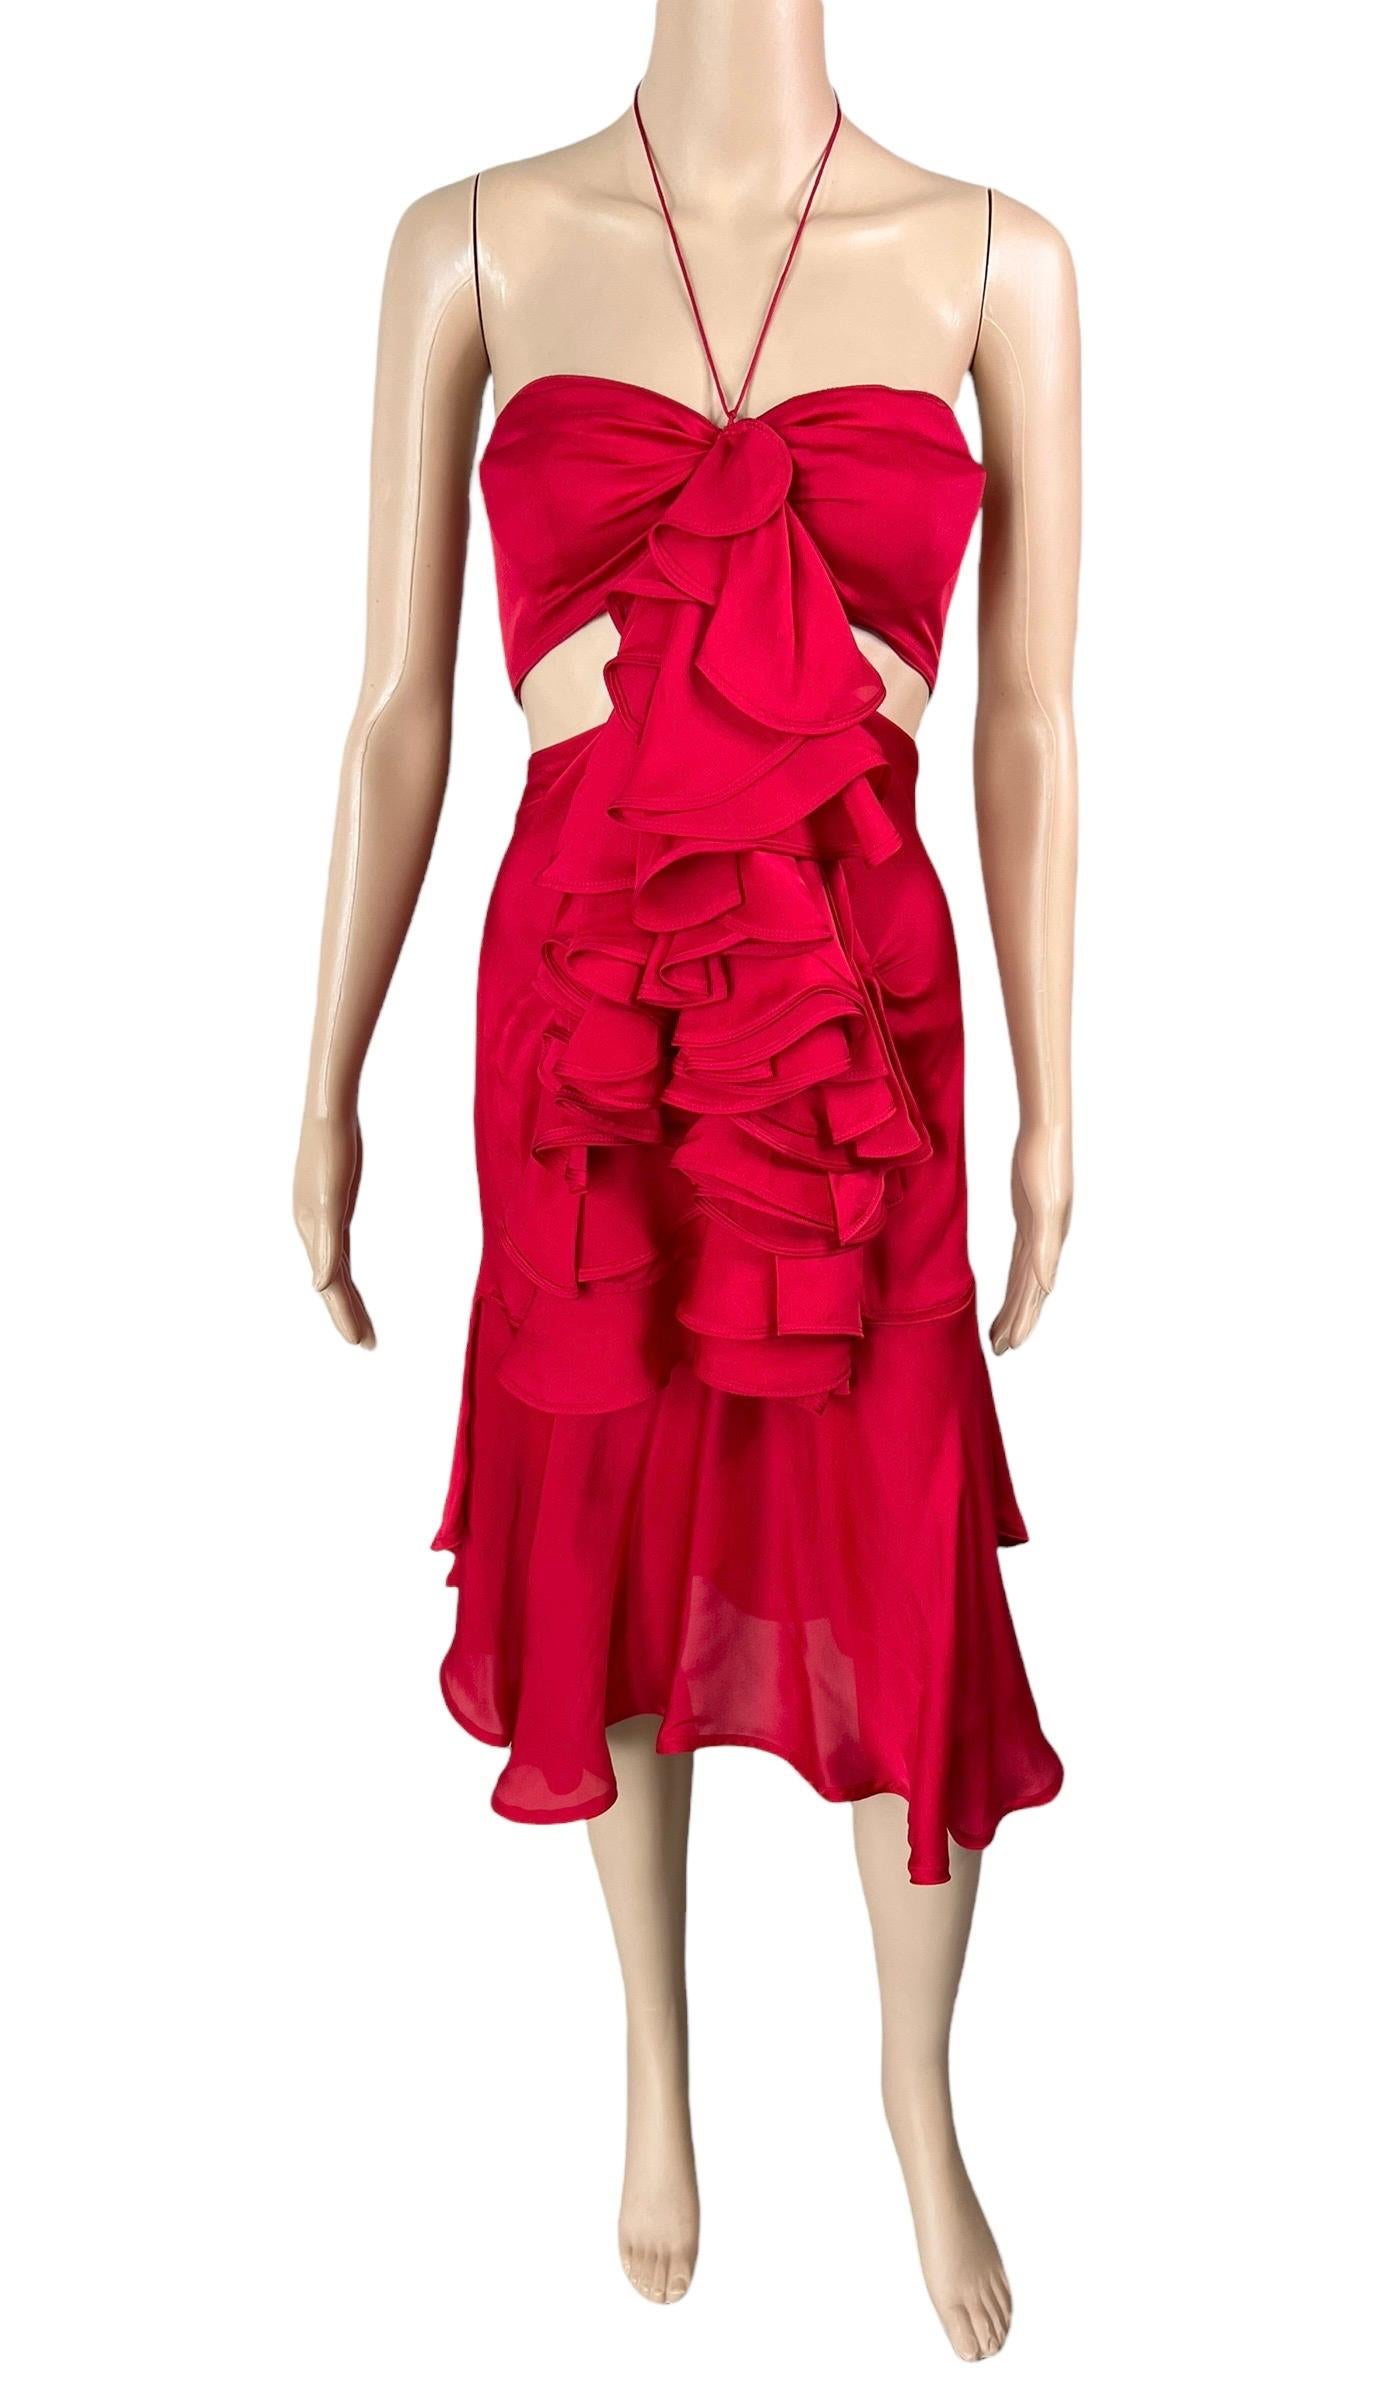 Tom Ford for Yves Saint Laurent  F/W 2003 Runway Ruffled Cutout Bra Red Dress  In Good Condition For Sale In Naples, FL